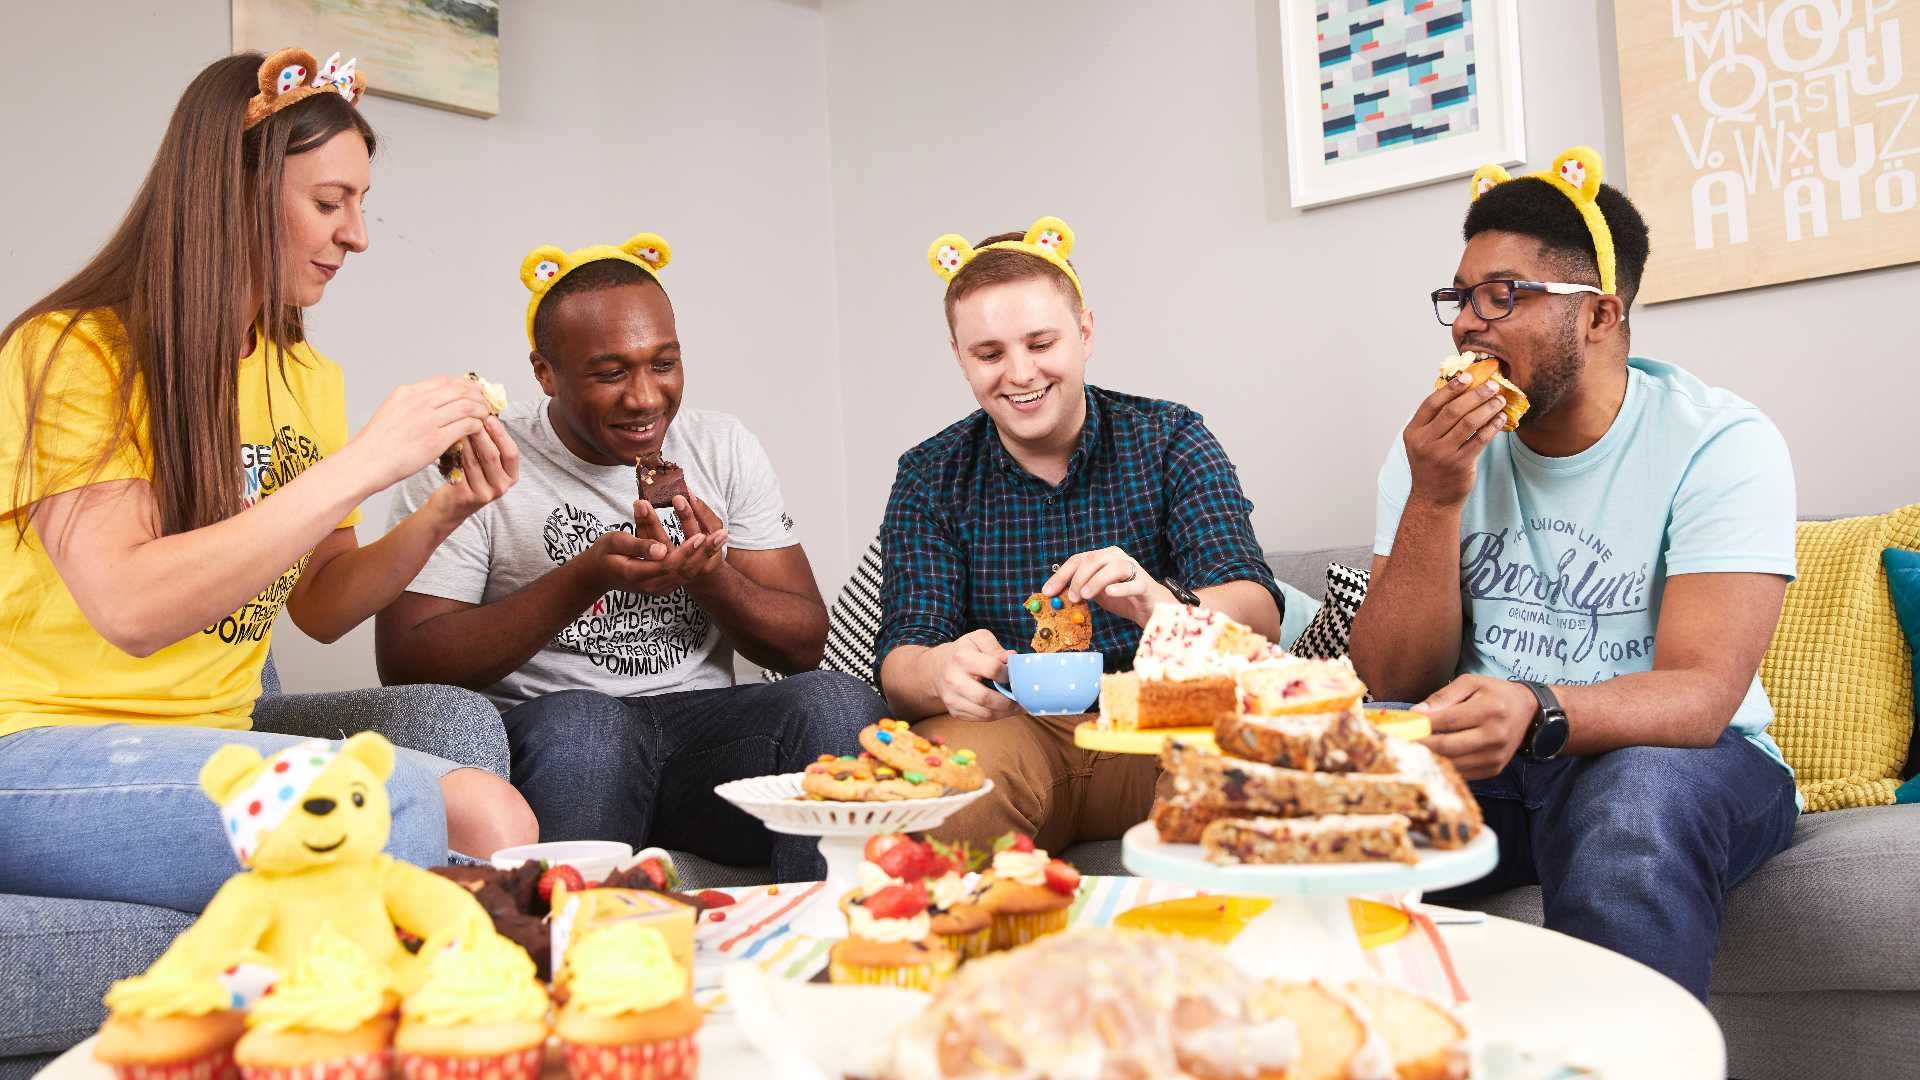 A group of adults sat eating cake wearing BBC Children in Need merchandise